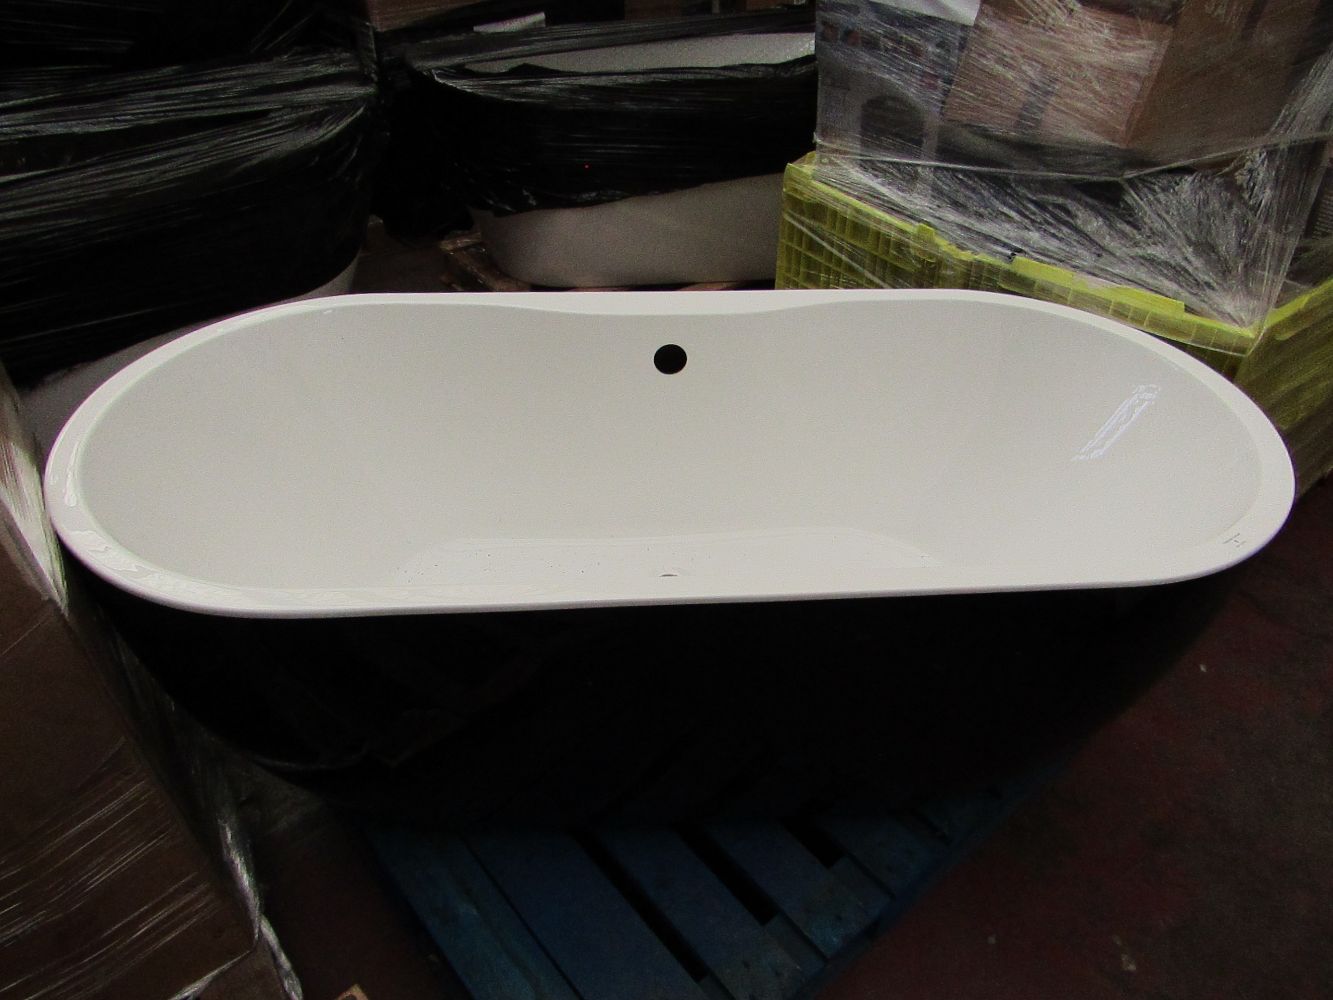 Wednesday Bathroom Auction containing; Designer Carisa radiators, designer free standing baths, Johnson Tiles and much more!